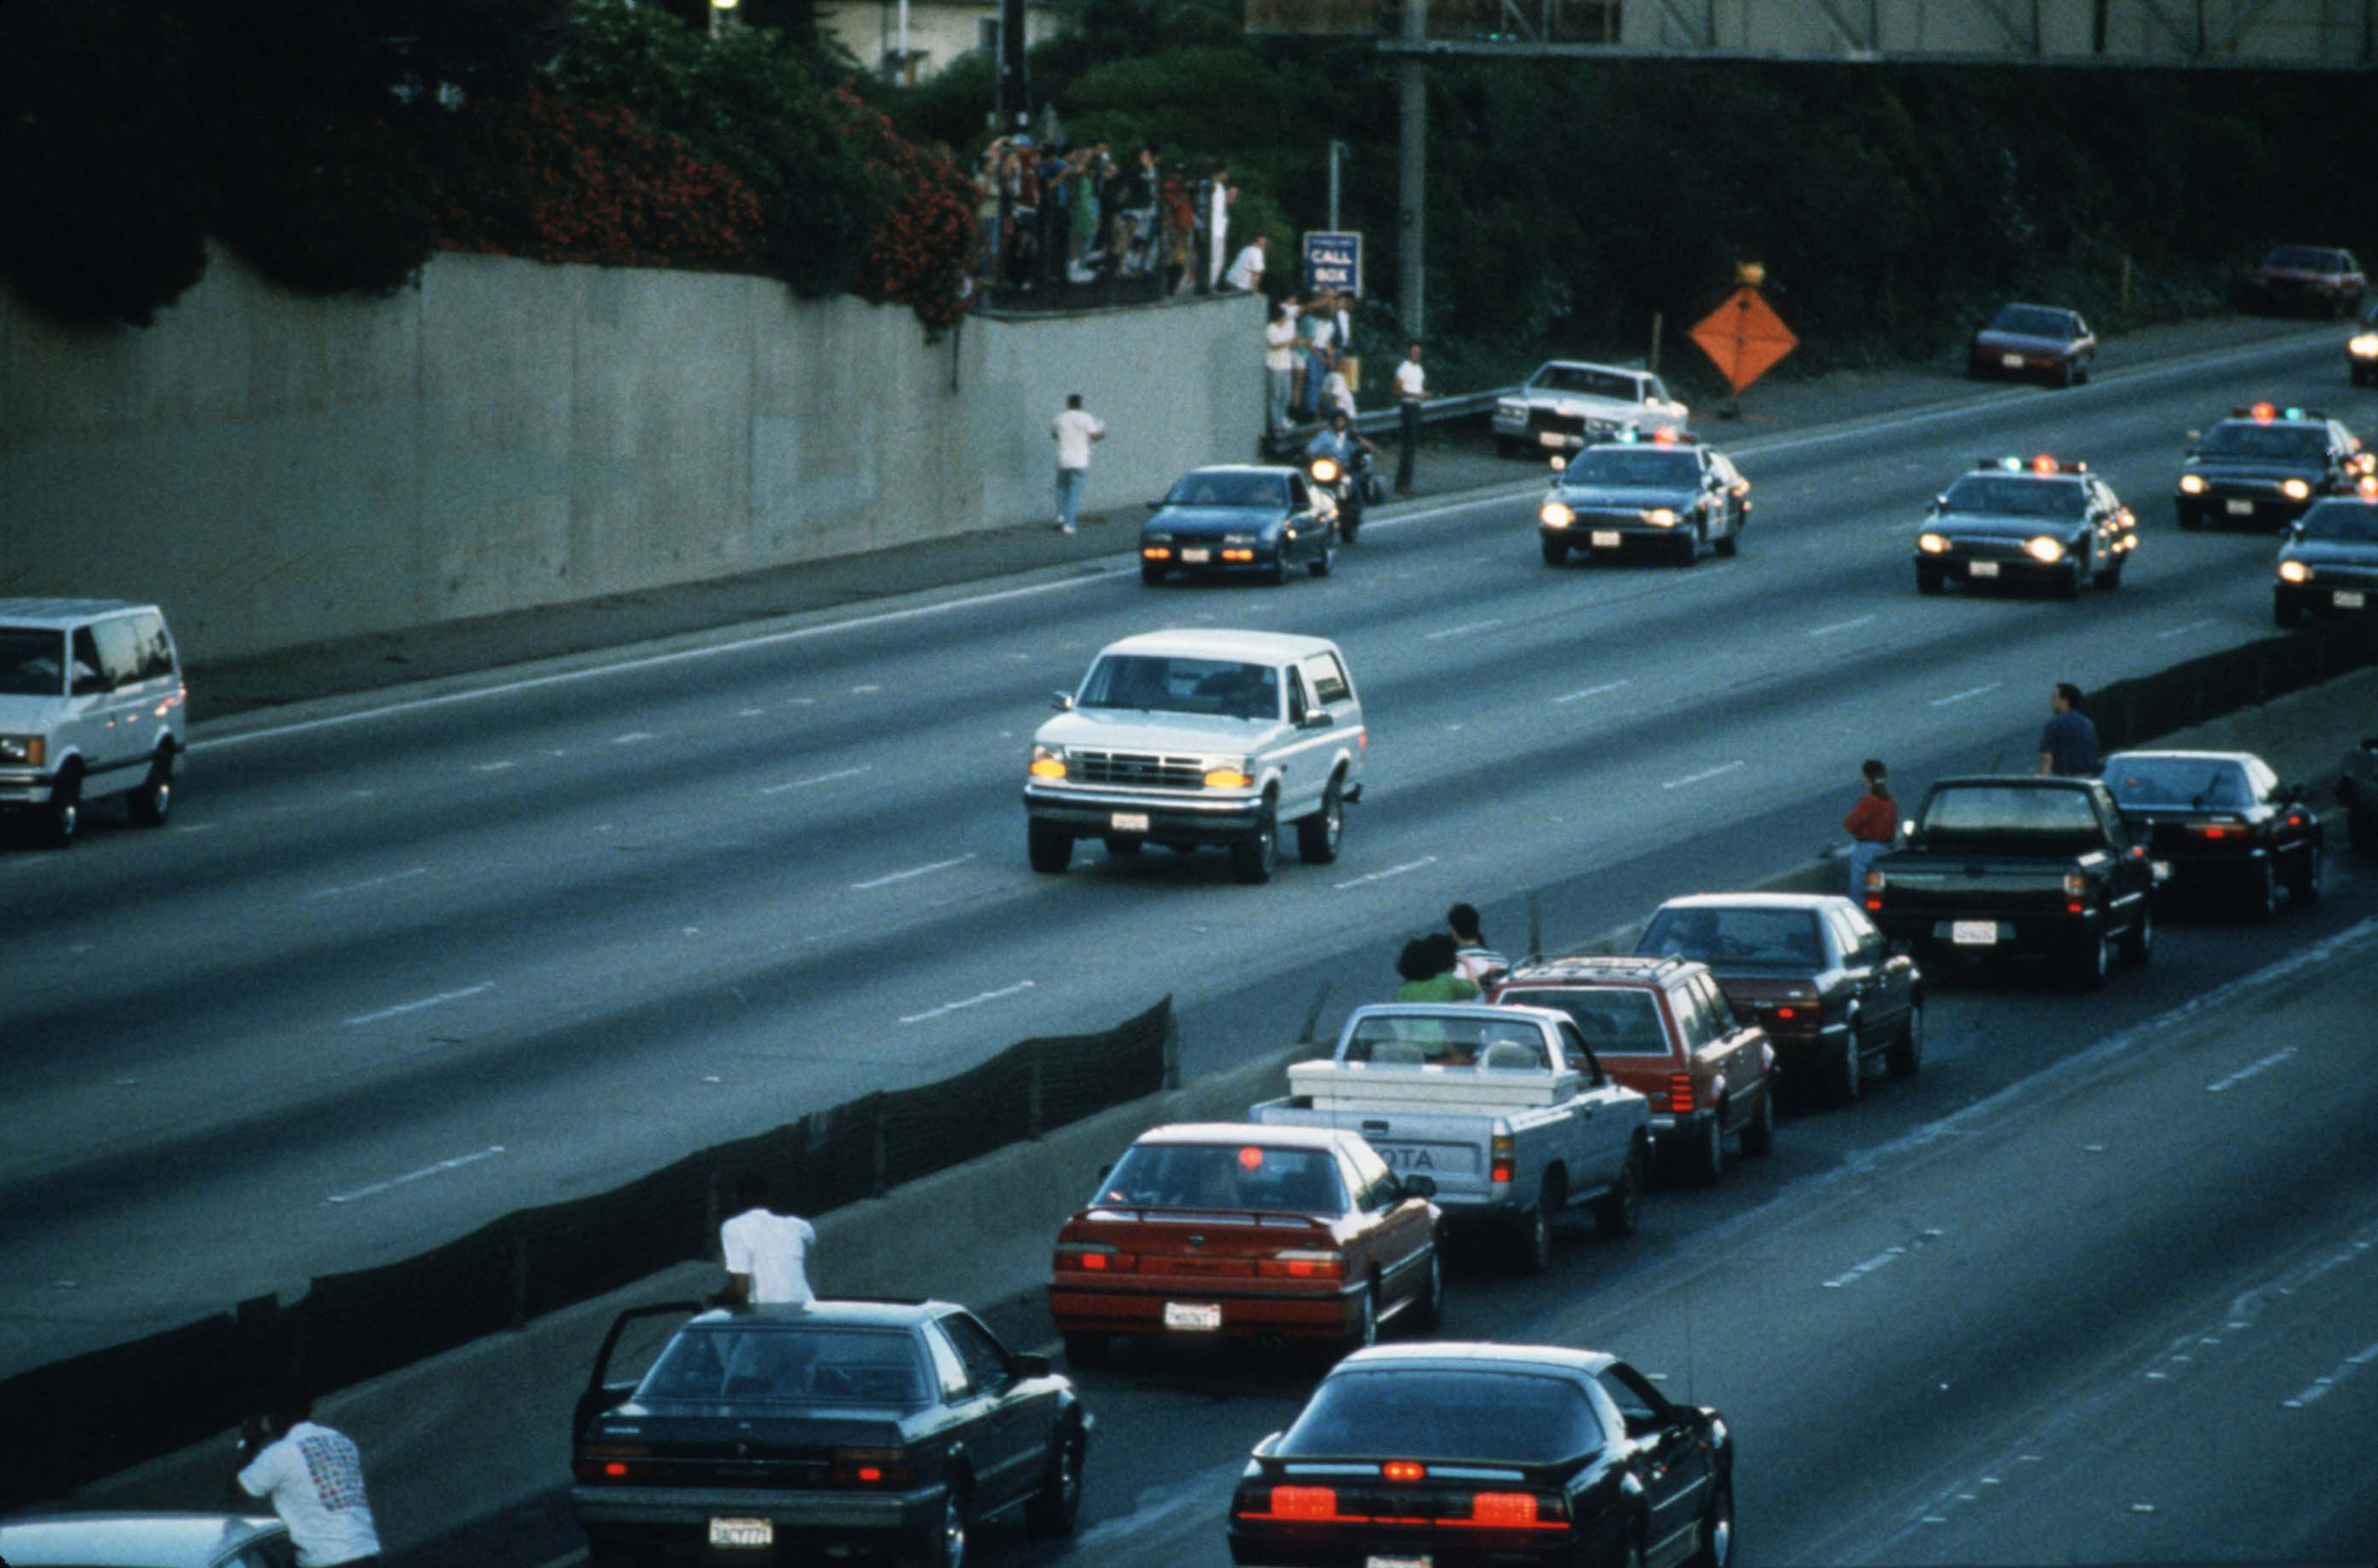 Motorists pull over to watch police pursue O.J. Simpson in a Ford Bronco on June 17, 1994, in Los Angeles, California.